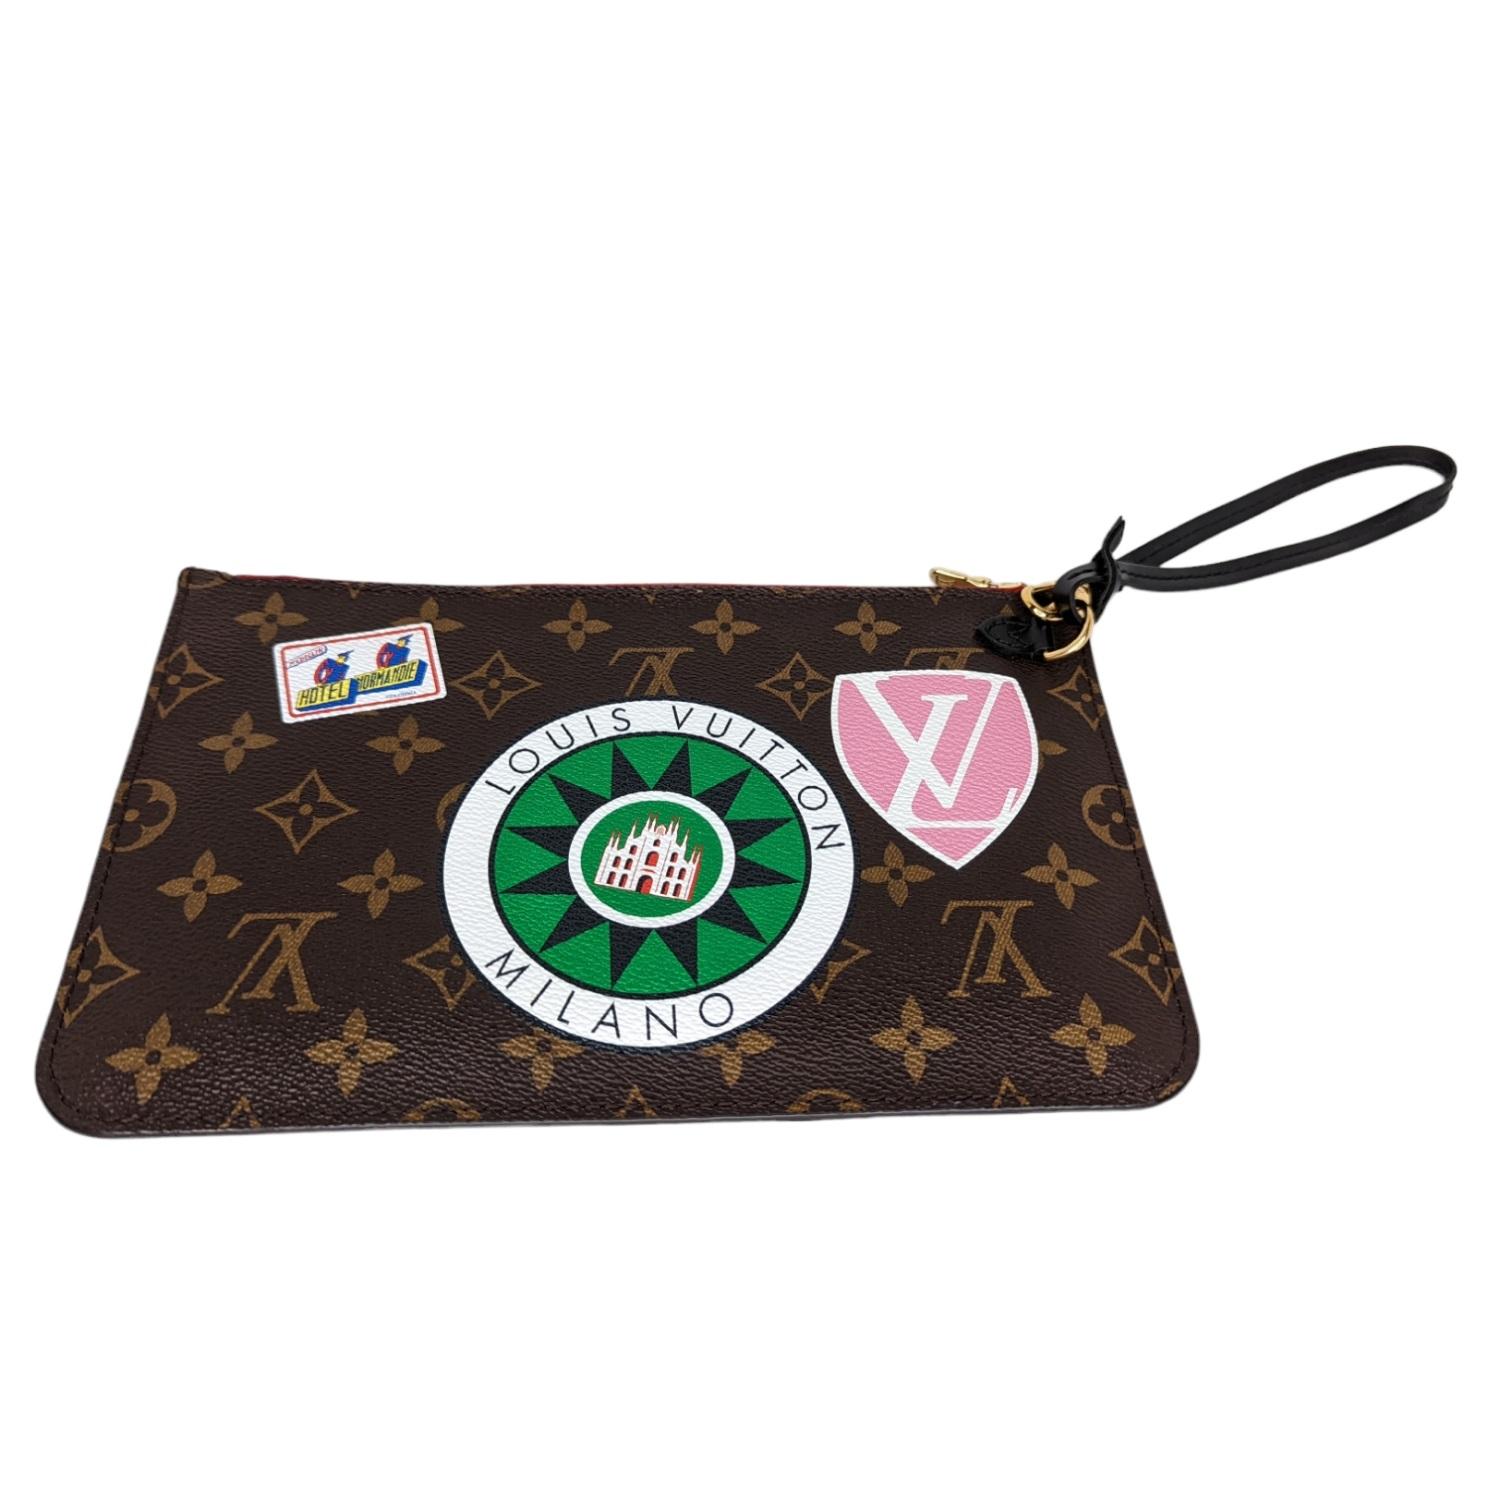 This pochette is crafted of Louis Vuitton monogram coated canvas, and features Nicolas Ghesquiere's playful take on classic hotel stickers, which Gaston-Louis Vuitton used to collect during his travels. The pouch features an optional black leather